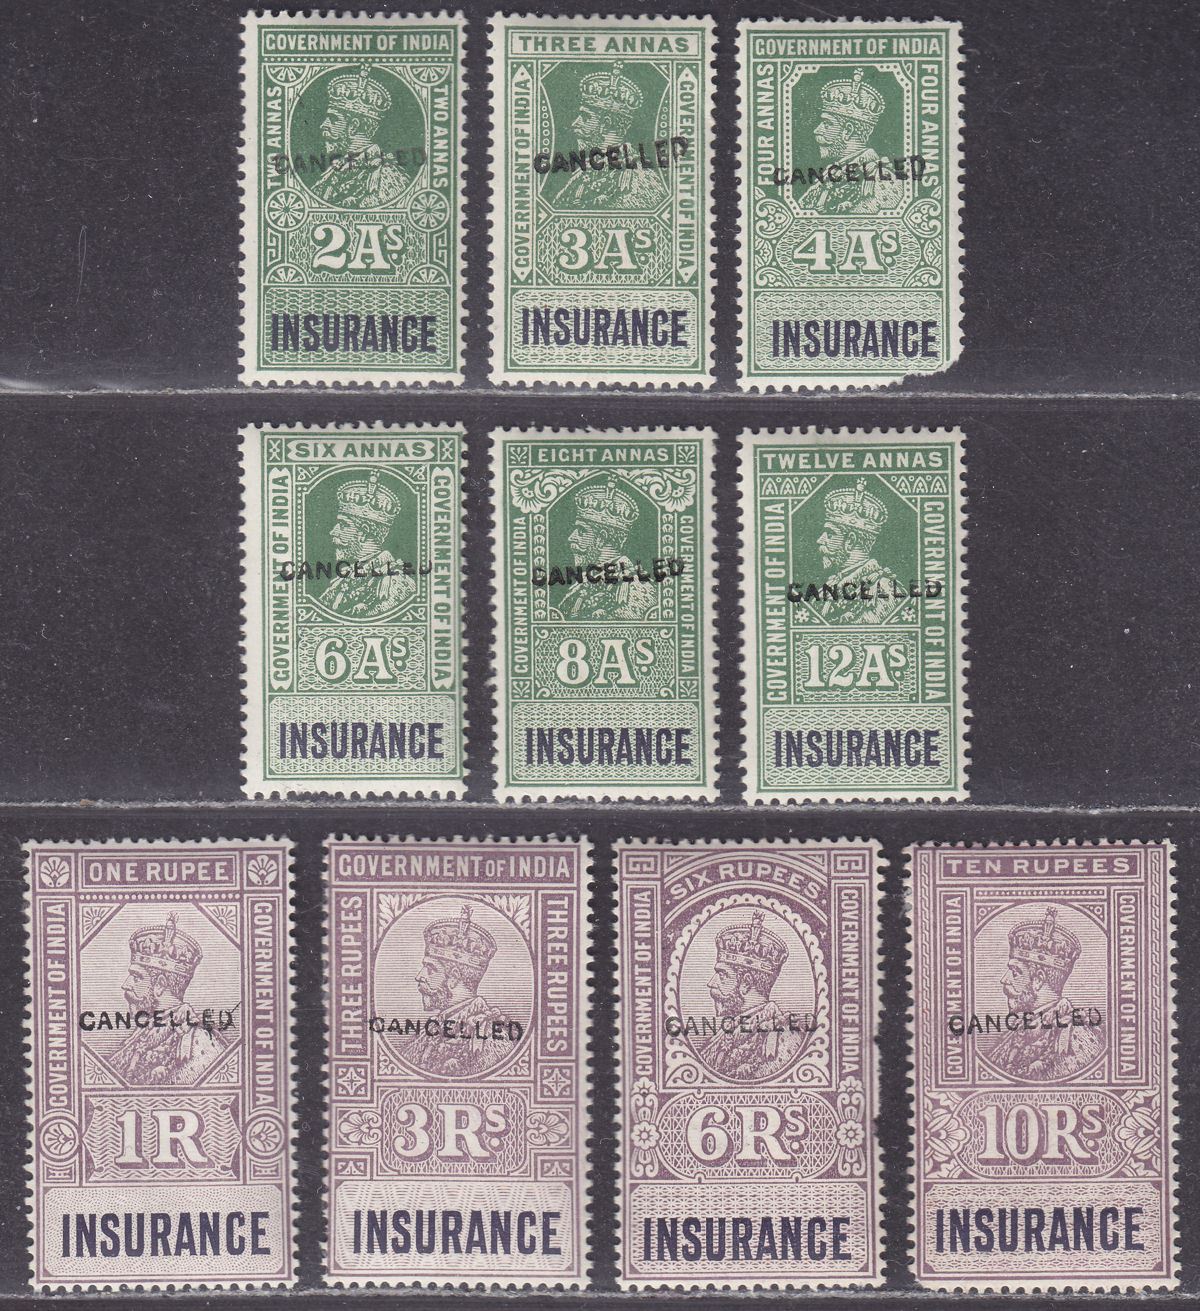 India 1923 KGV Revenue Insurance Type 25 CANCELLED 2a - 10r BF12c-21c